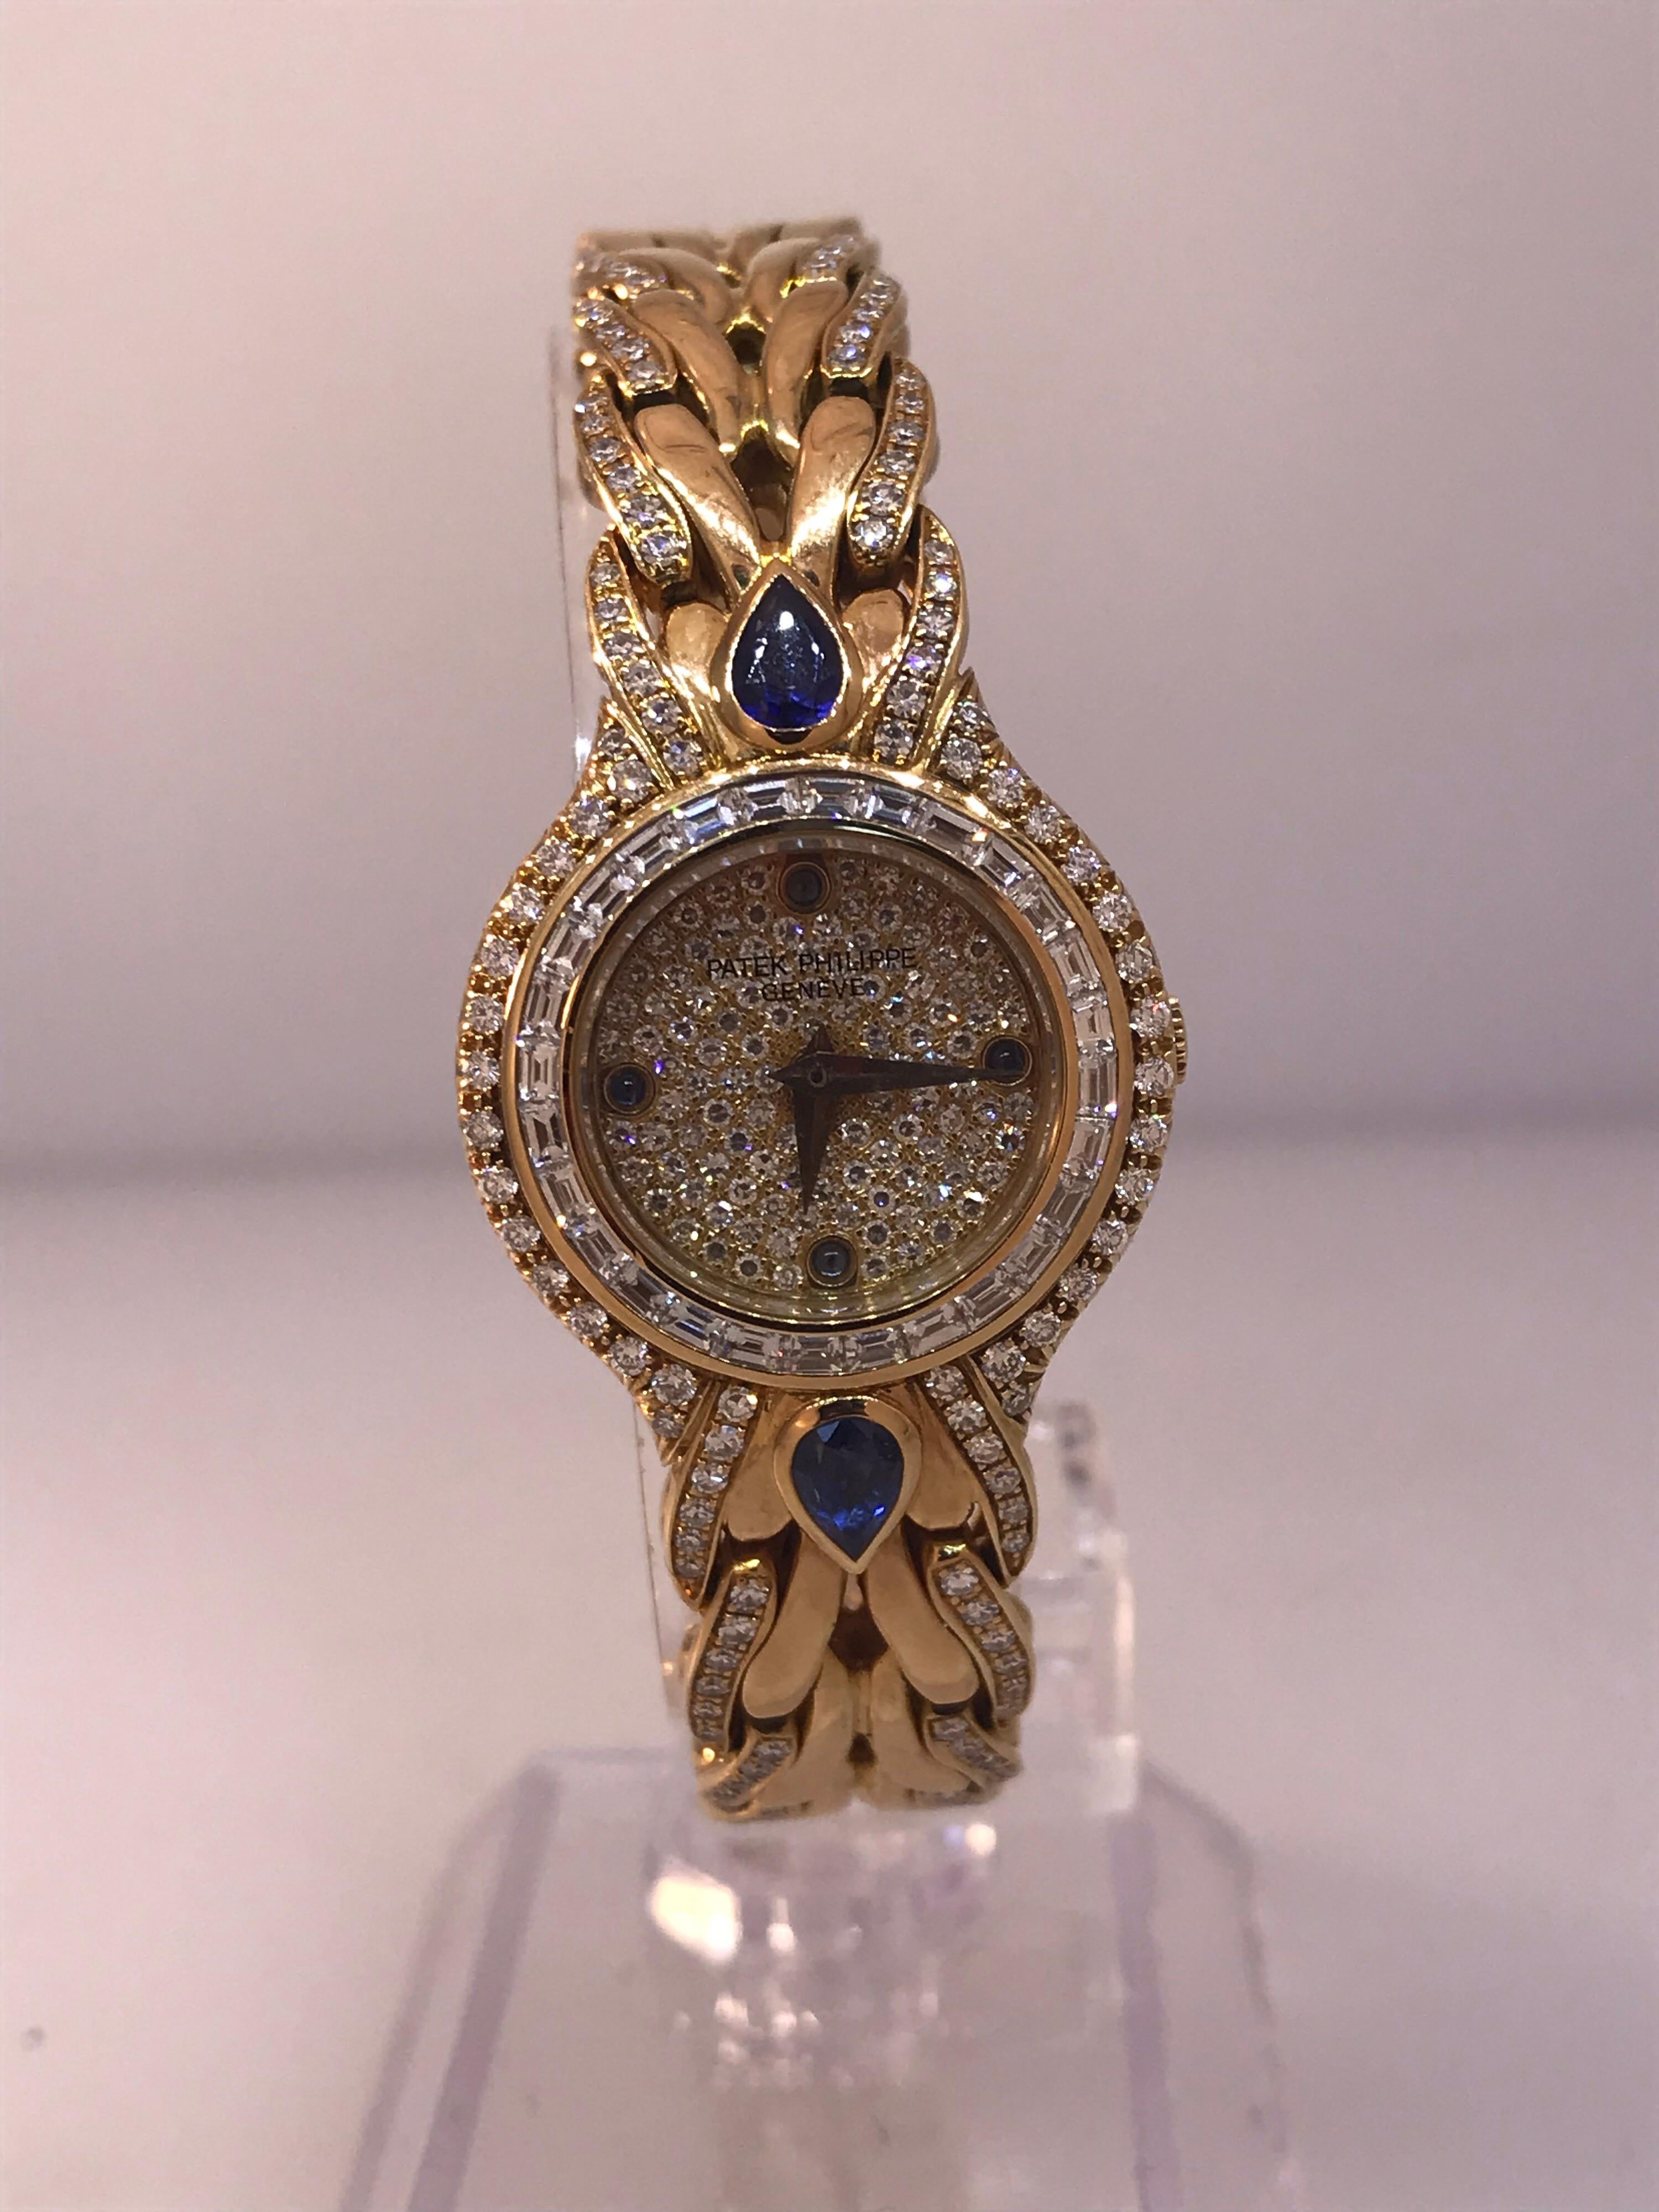 Patek Philippe La Flamme Yellow Gold Pave Diamond and Sapphire Ladies Watch 4808 In Excellent Condition For Sale In New York, NY